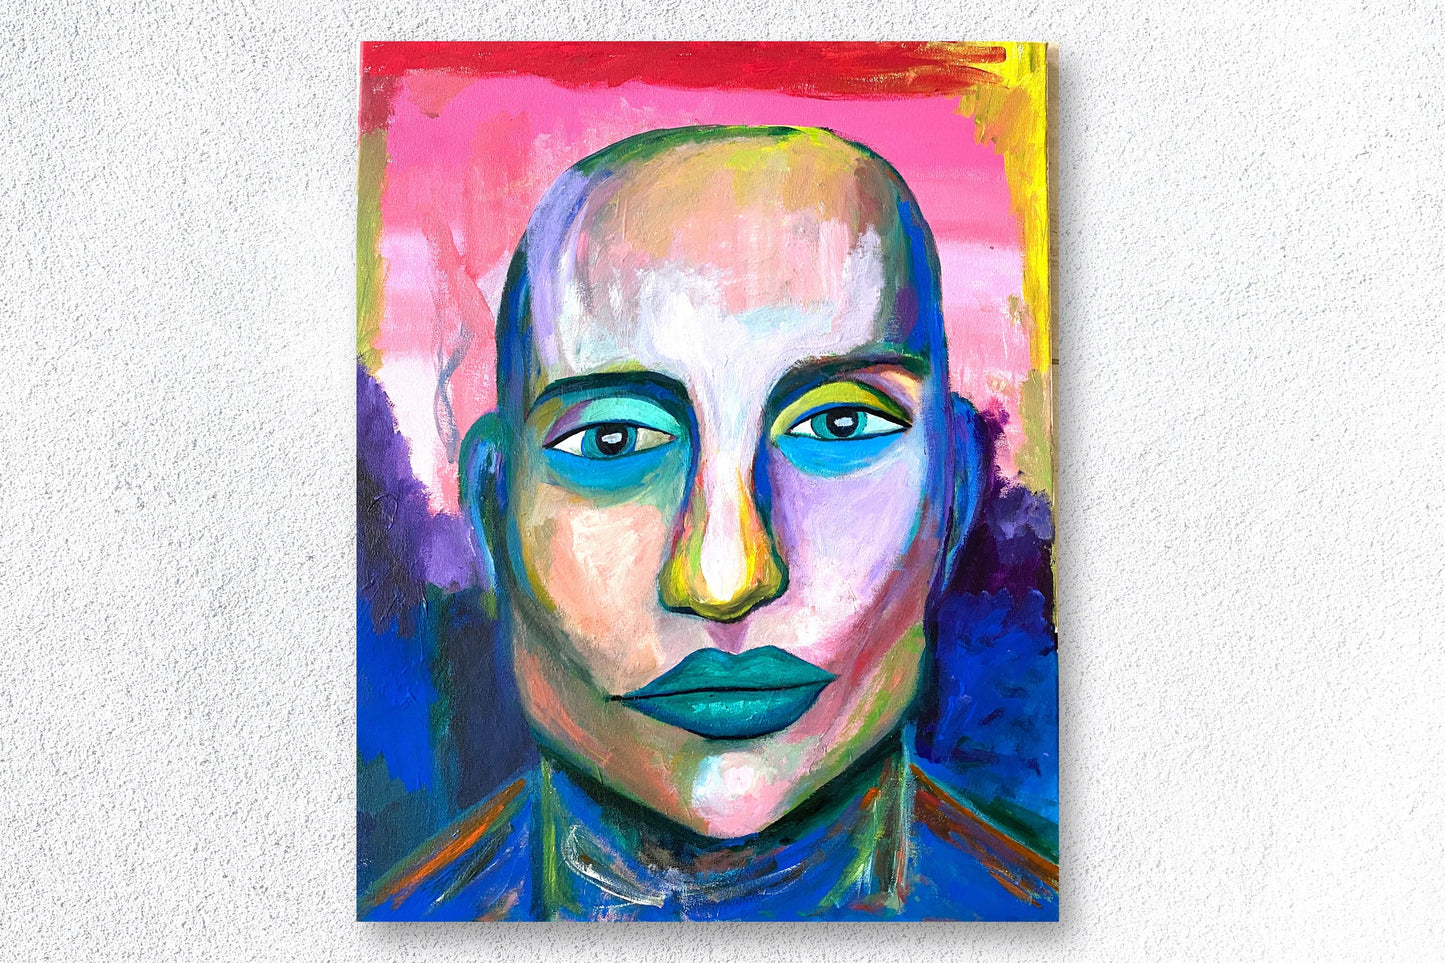 Colorful Canvas Painting of Woman, Pink and Blue Face, Large Original Artwork